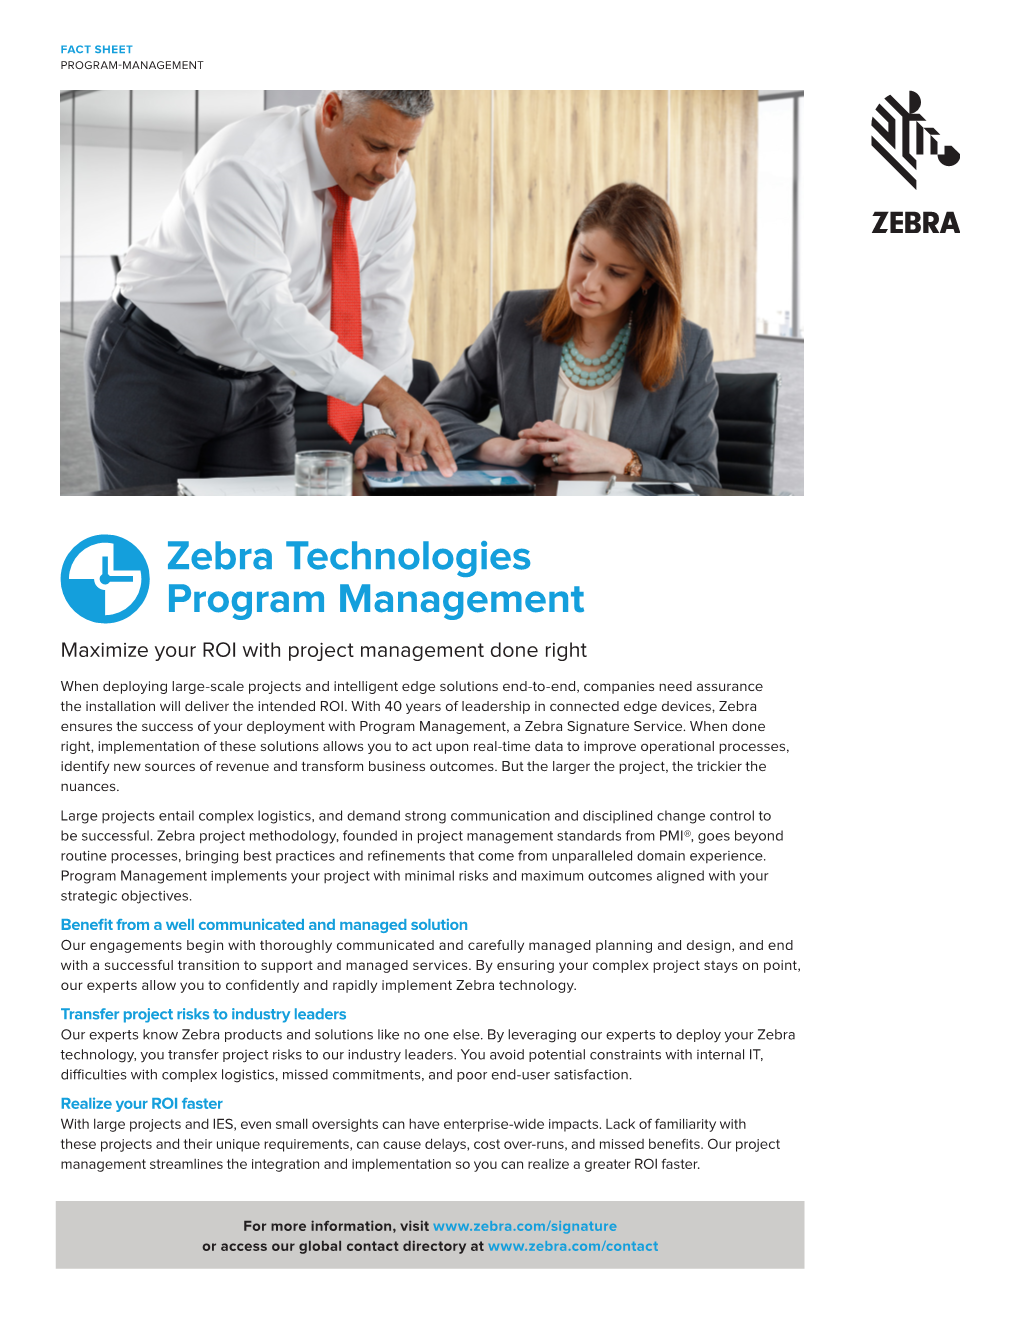 Zebra Technologies Program Management Maximize Your ROI with Project Management Done Right